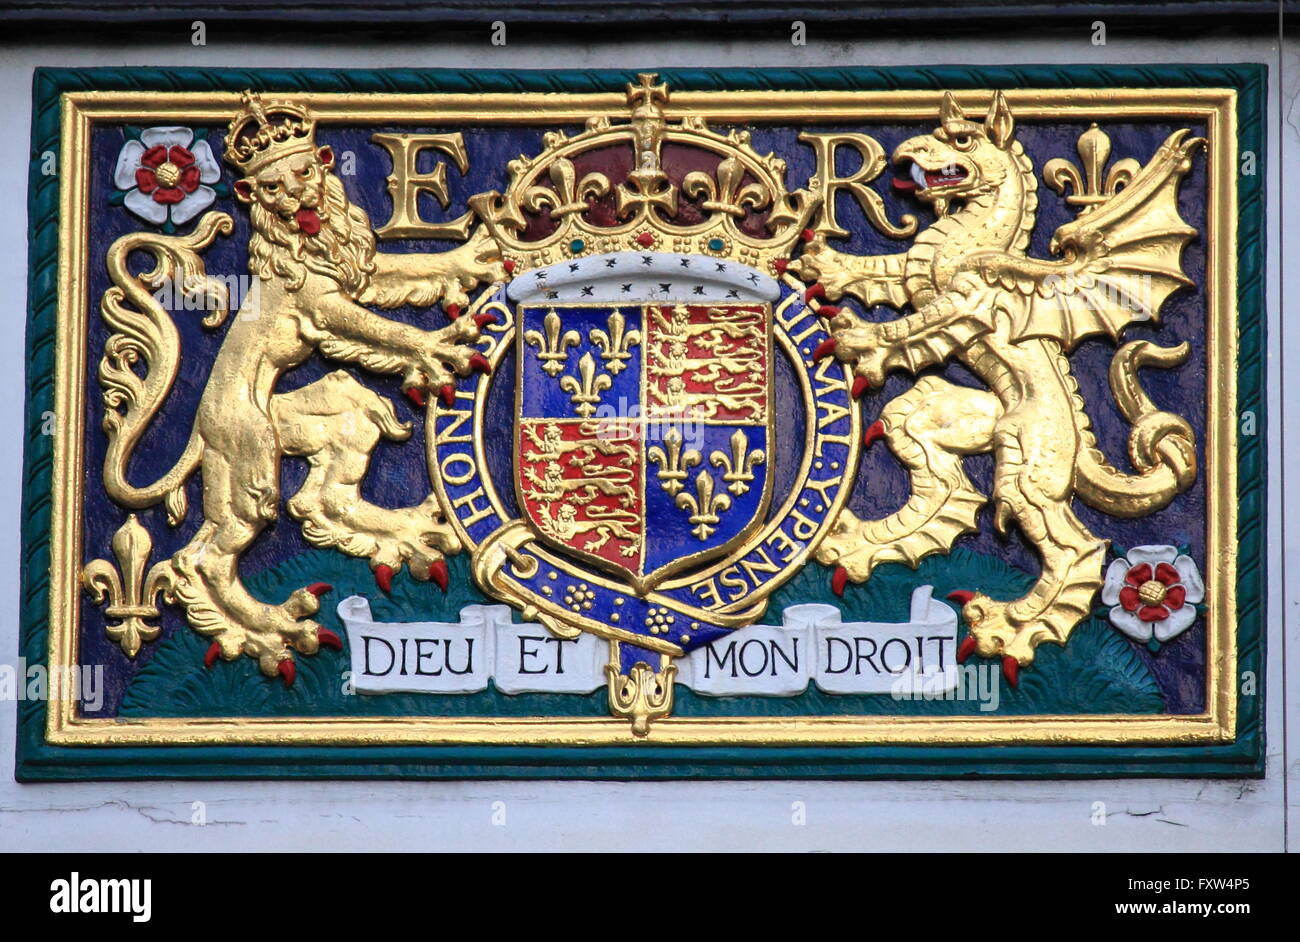 Royal Coat Of Arms Of The United Kingdom Having The Motto Dieu Et Mon Droit Stock Photo Alamy